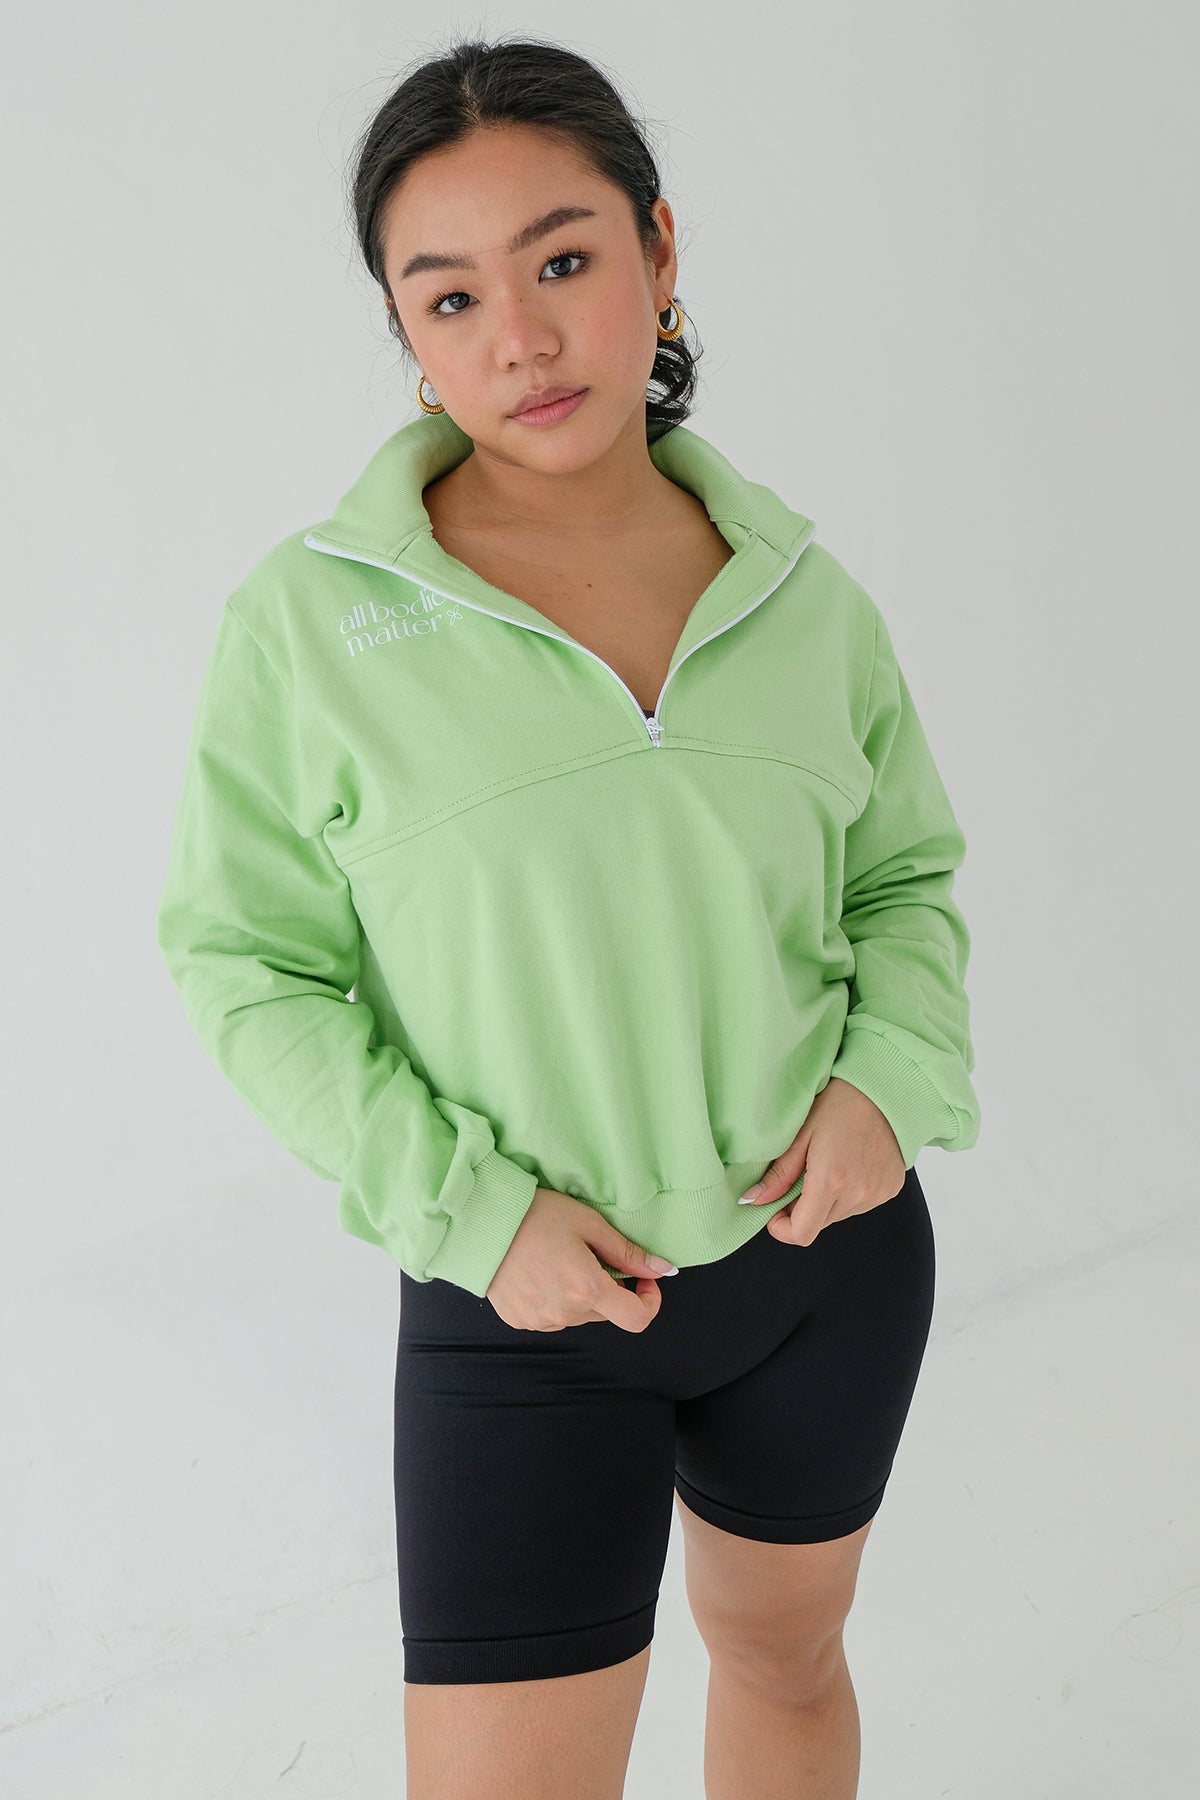 All Bodies Matter Sweater In Lime (4 LEFT)